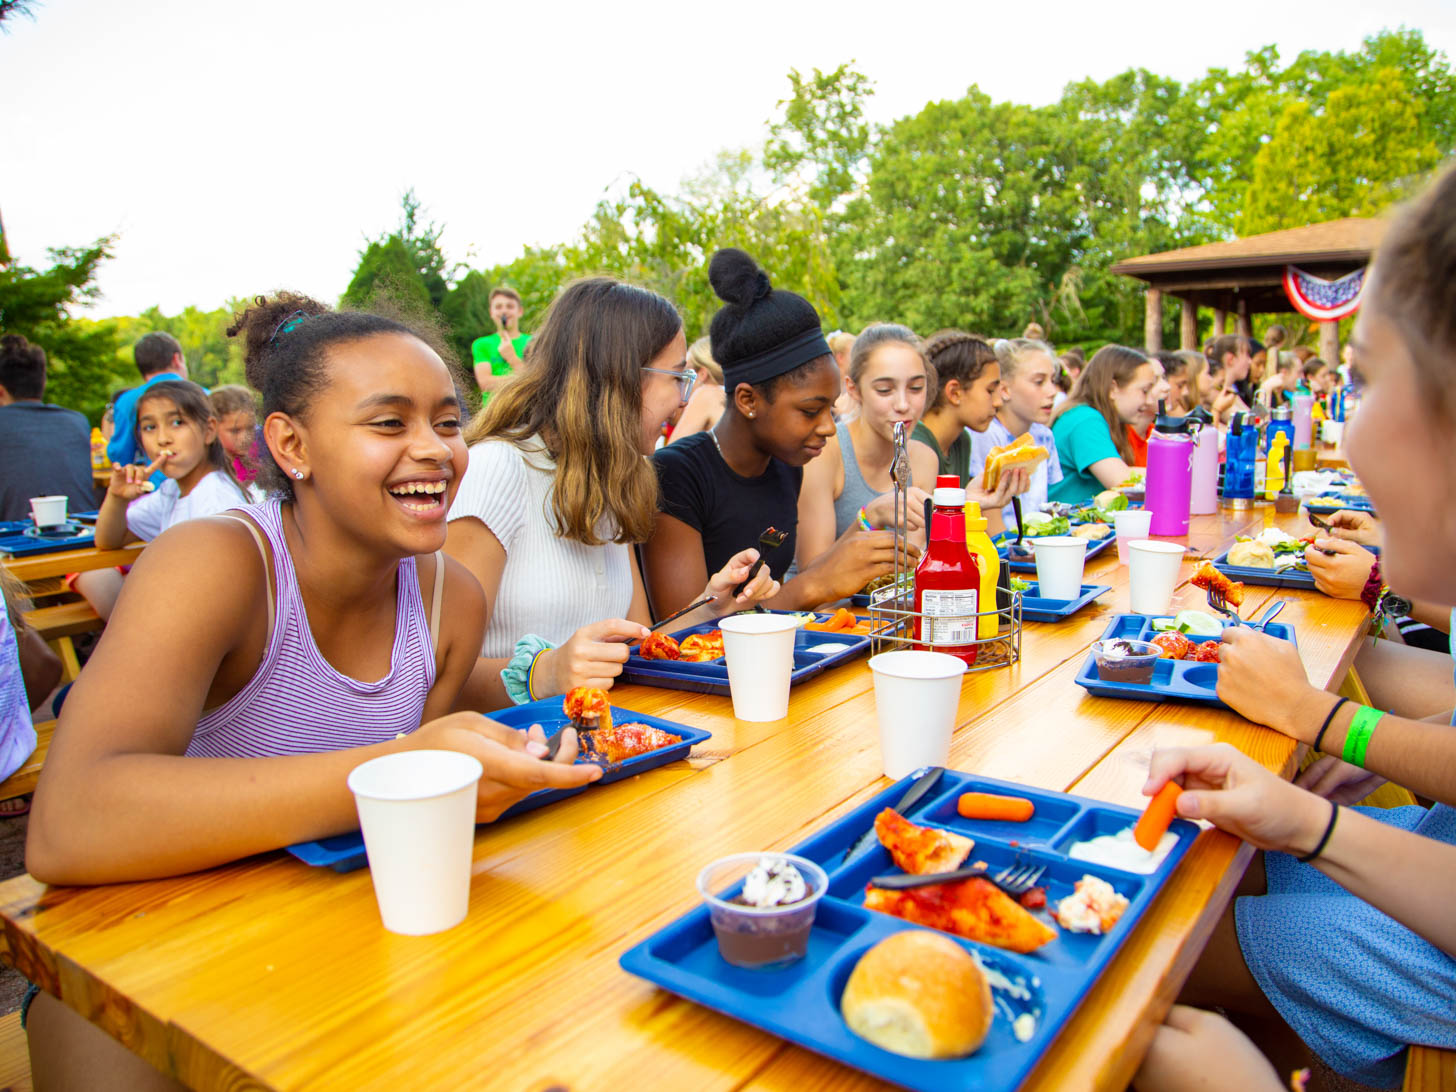 group of young girls eating at picnic tables